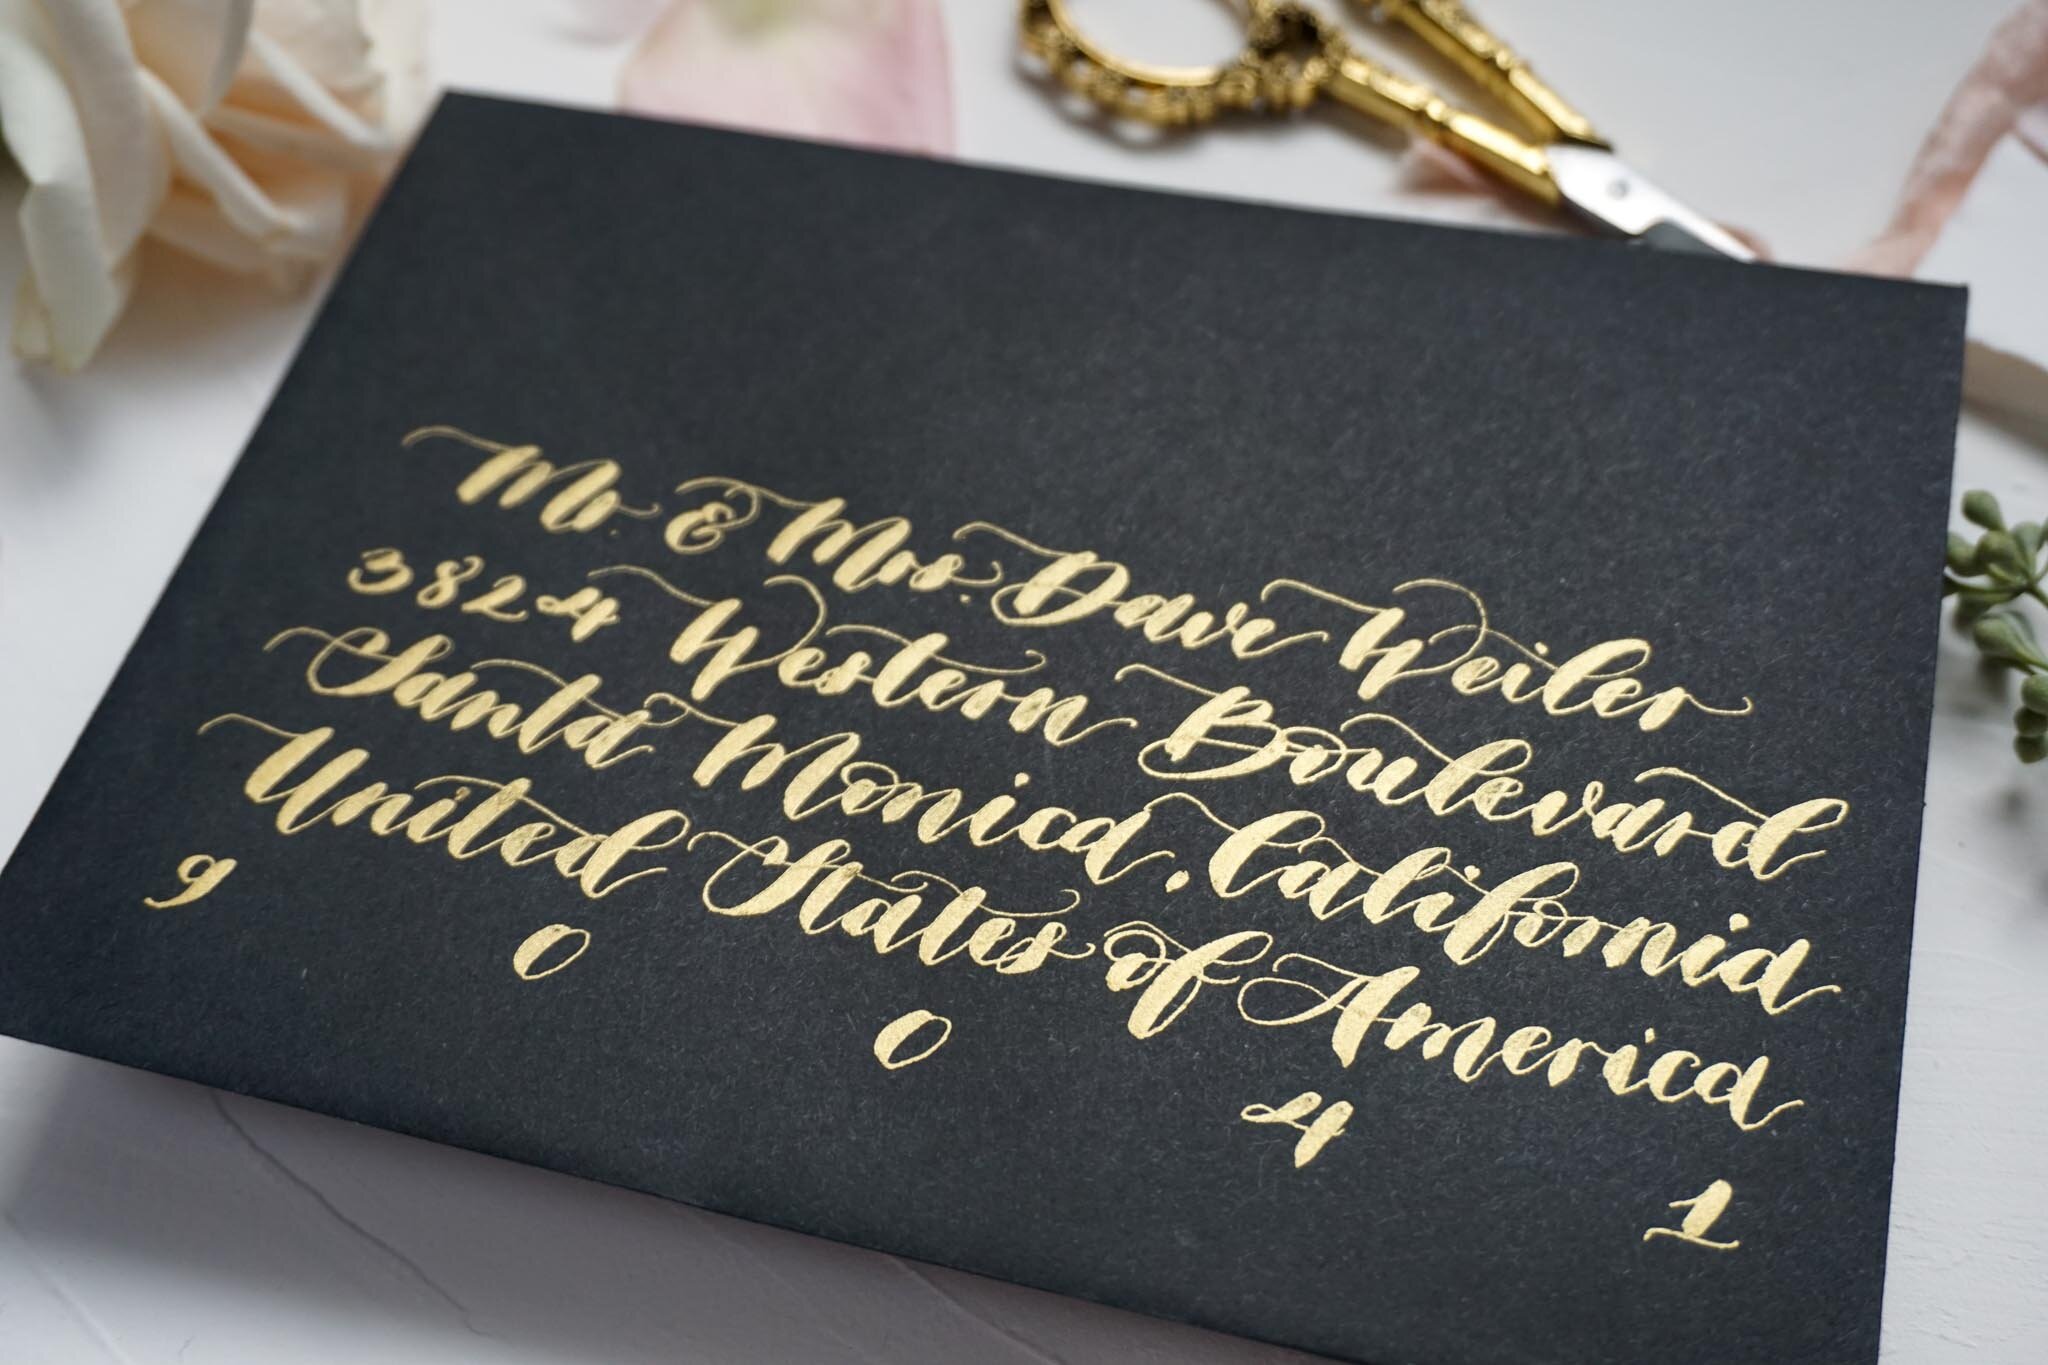 shescloudy calligraphy_los angeles_envelope calligraphy .jpg